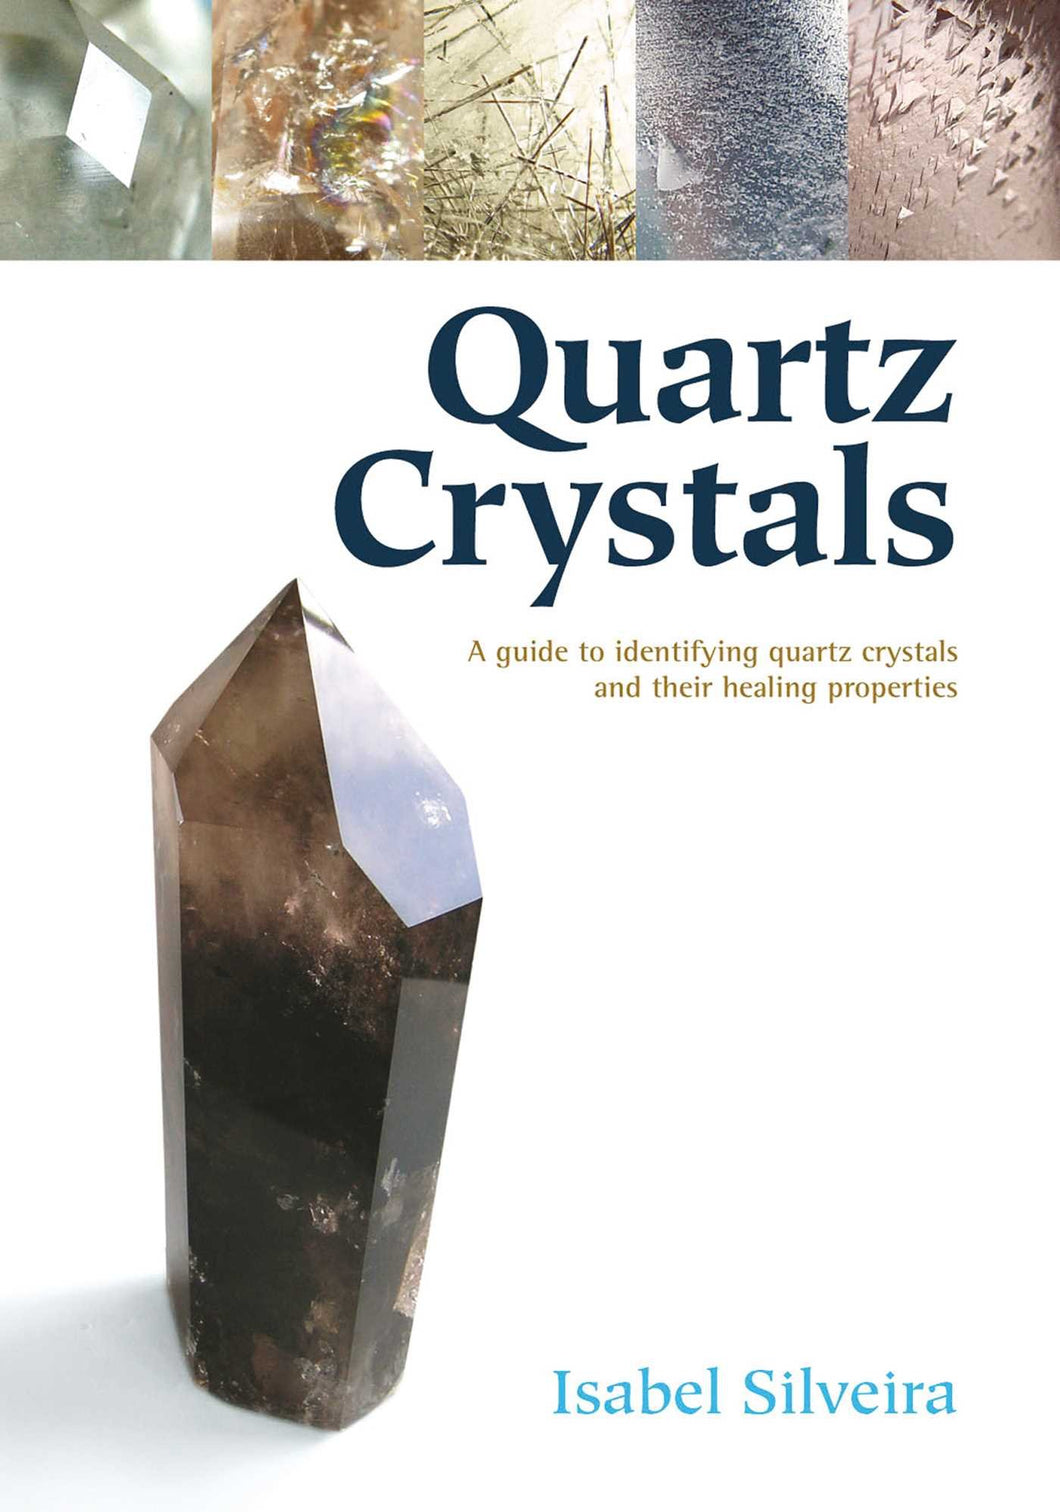 Quartz Crystals: A Guide to Identifying Quartz Crystals and Their Healing Properties, Including the Many Types of Clear Quartz Crystals